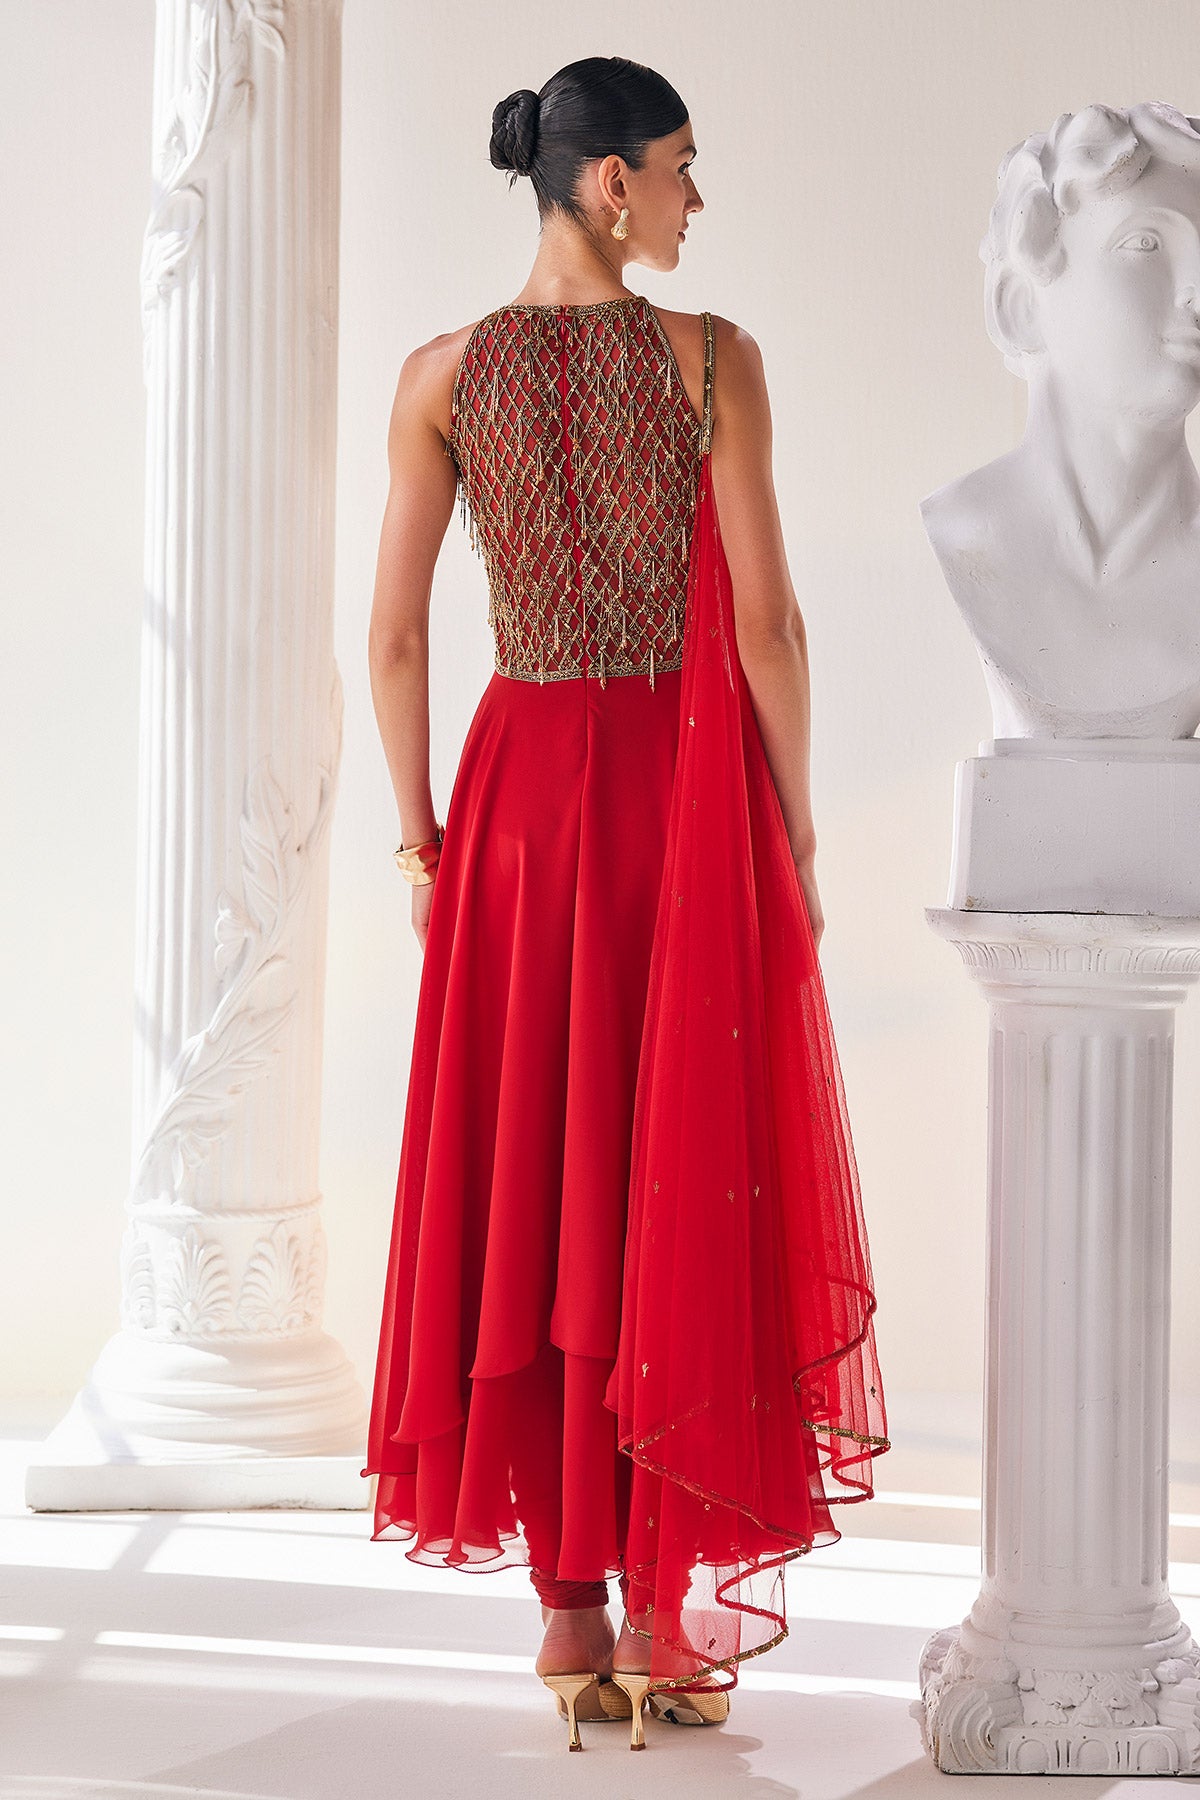 Red Georgette High Low Anarkali Designed With An Emroidered Bodice Paired With A Churidar And A Net Dupatta.